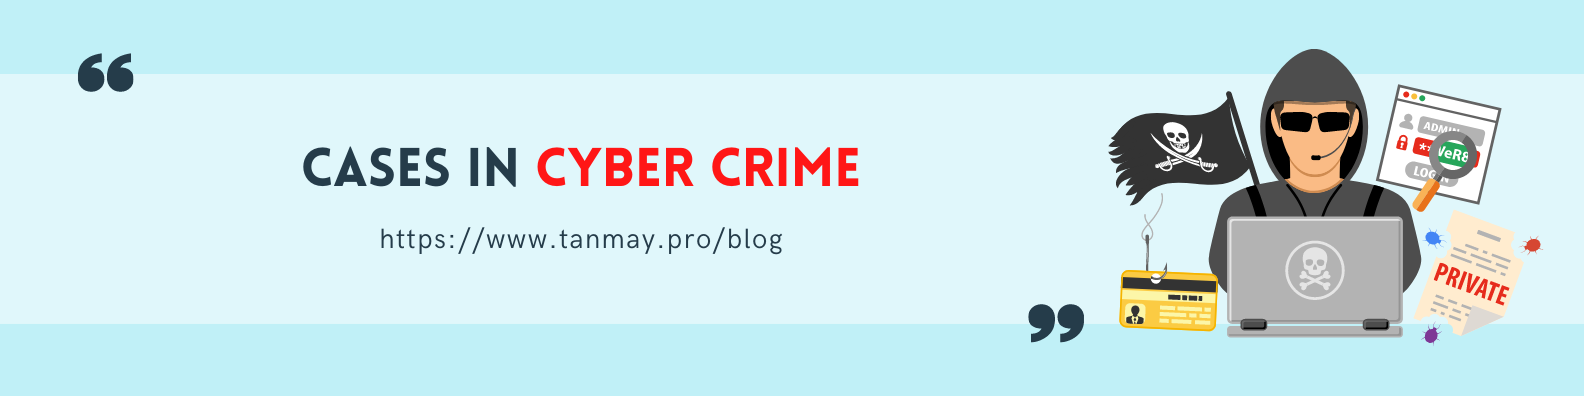 Cases in cyber crime